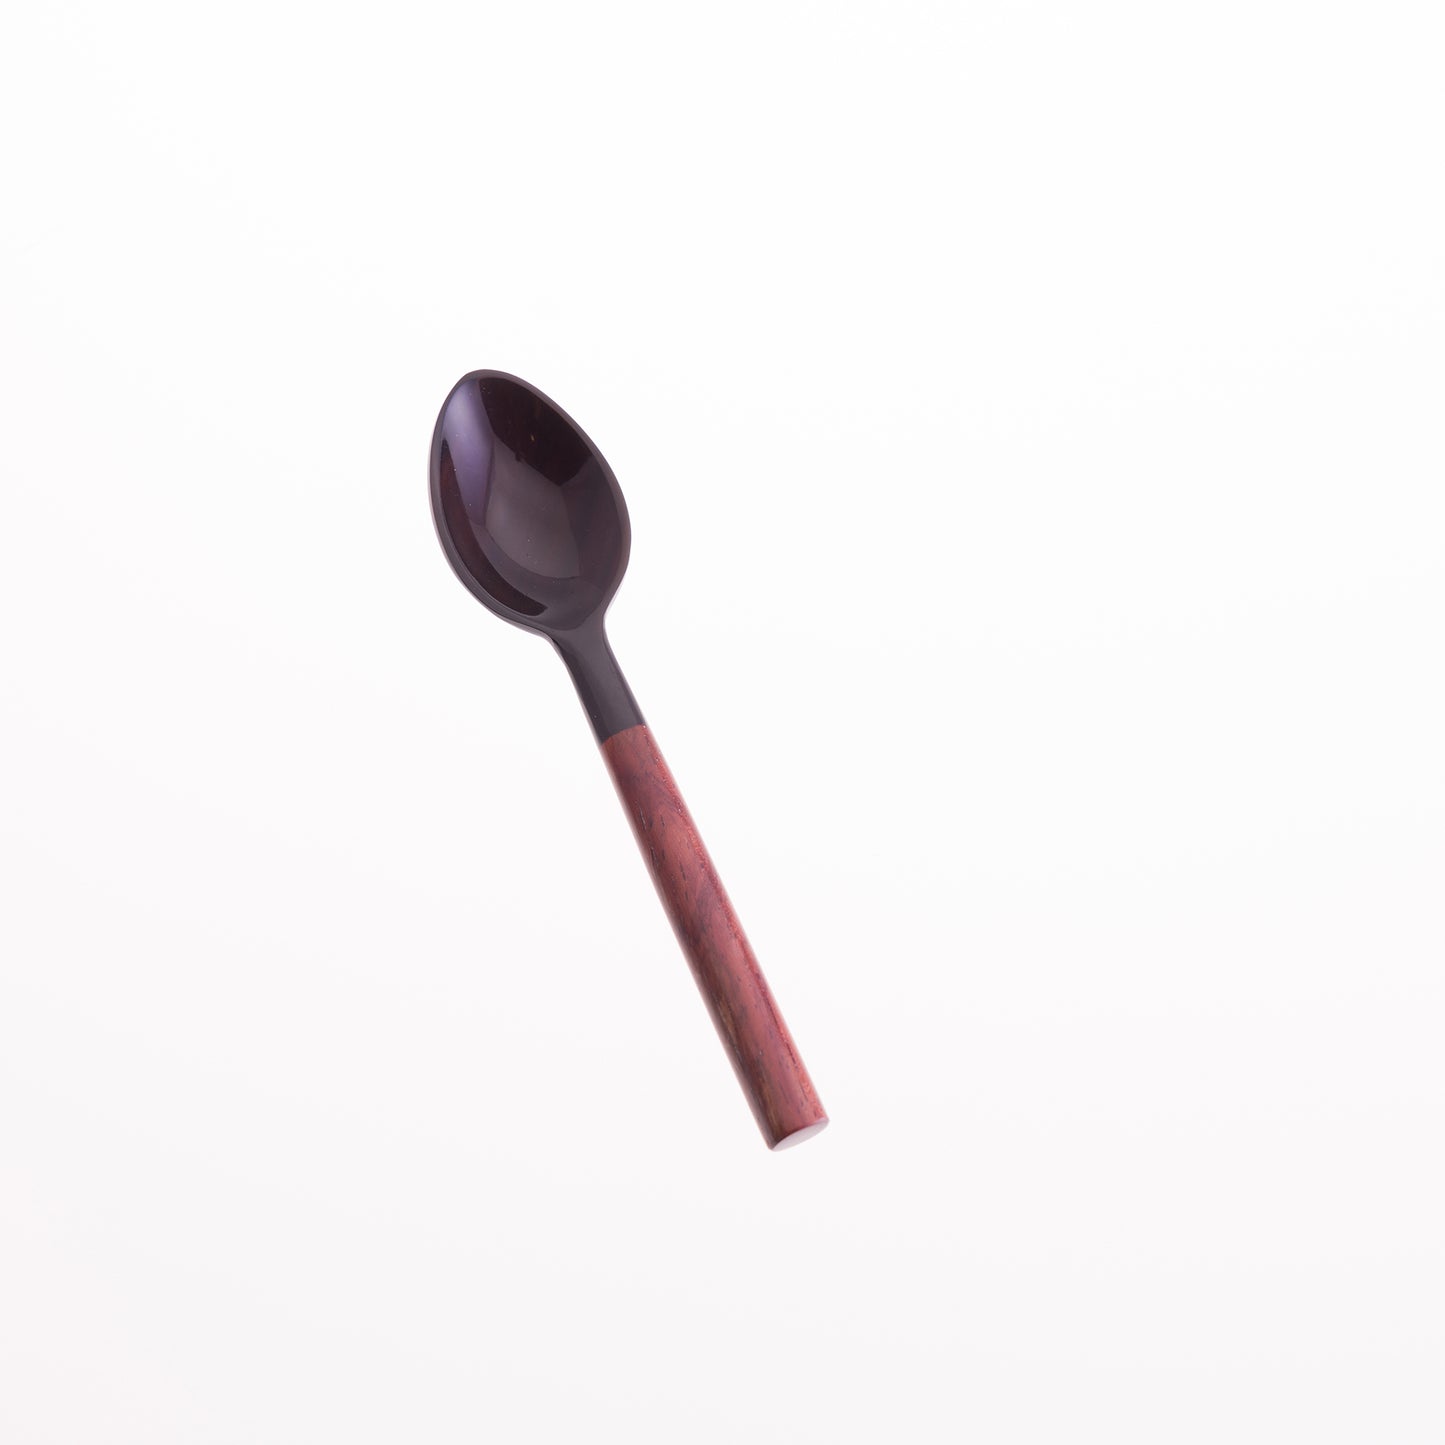 A black water buffalo horn egg spoon with a rosewood handle